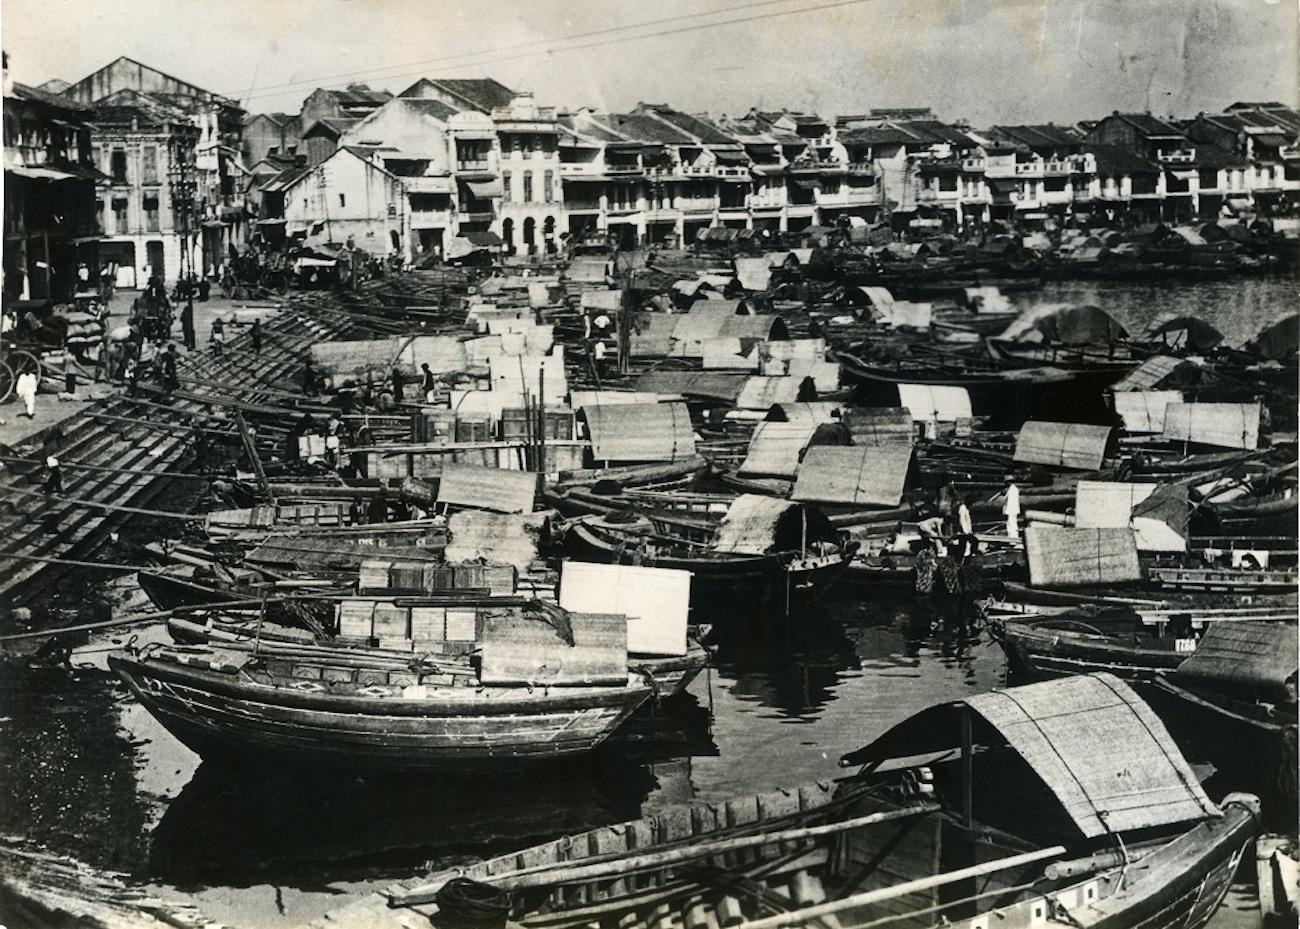 View of the Ancient Port of Singapore - Vintage Photo 1930s